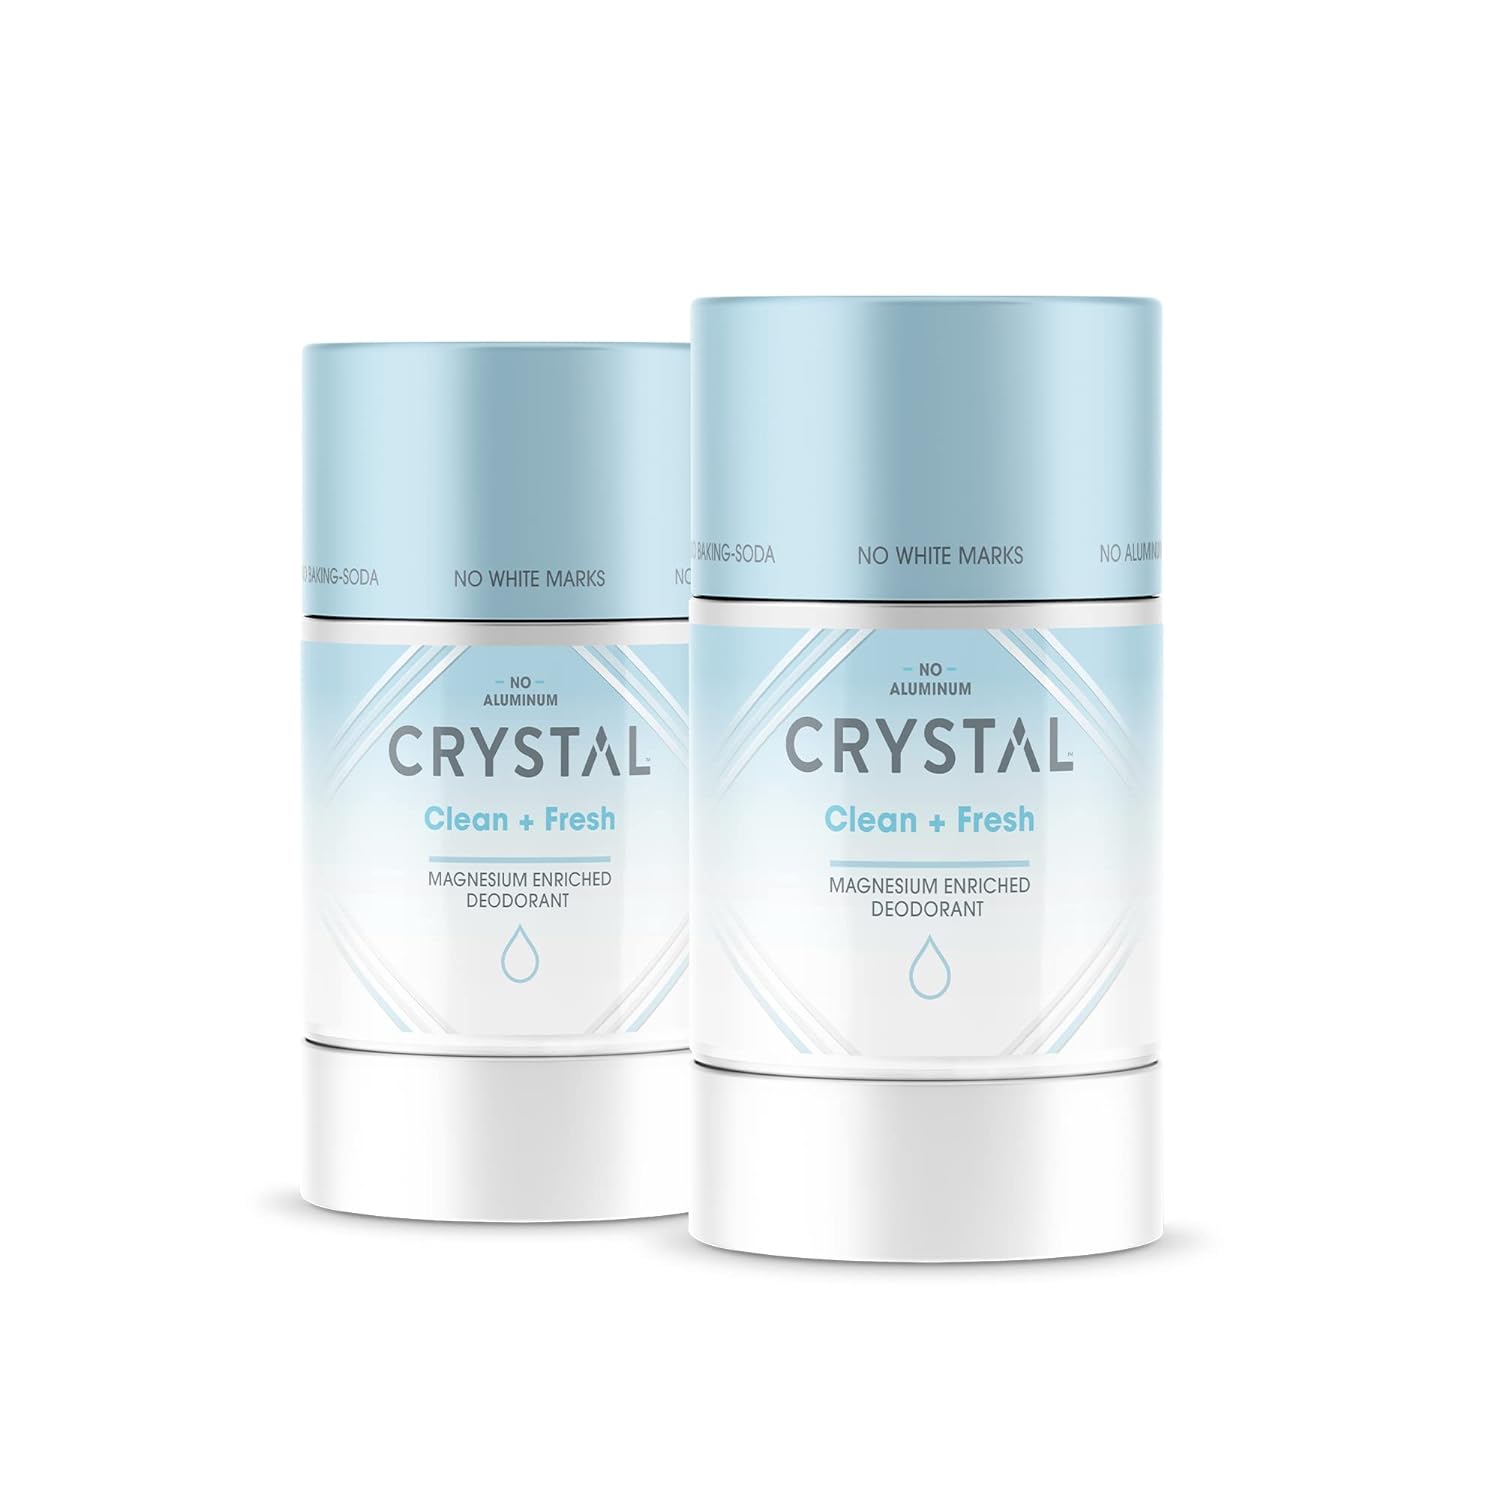 Crystal Magnesium Solid Stick Natural Deodorant, Non-Irritating Aluminum Free Deodorant for Men or Women, Safely and Effectively Fights Odor, Baking Soda Free,Clean + Fresh (2.5 oz) 2 Pack